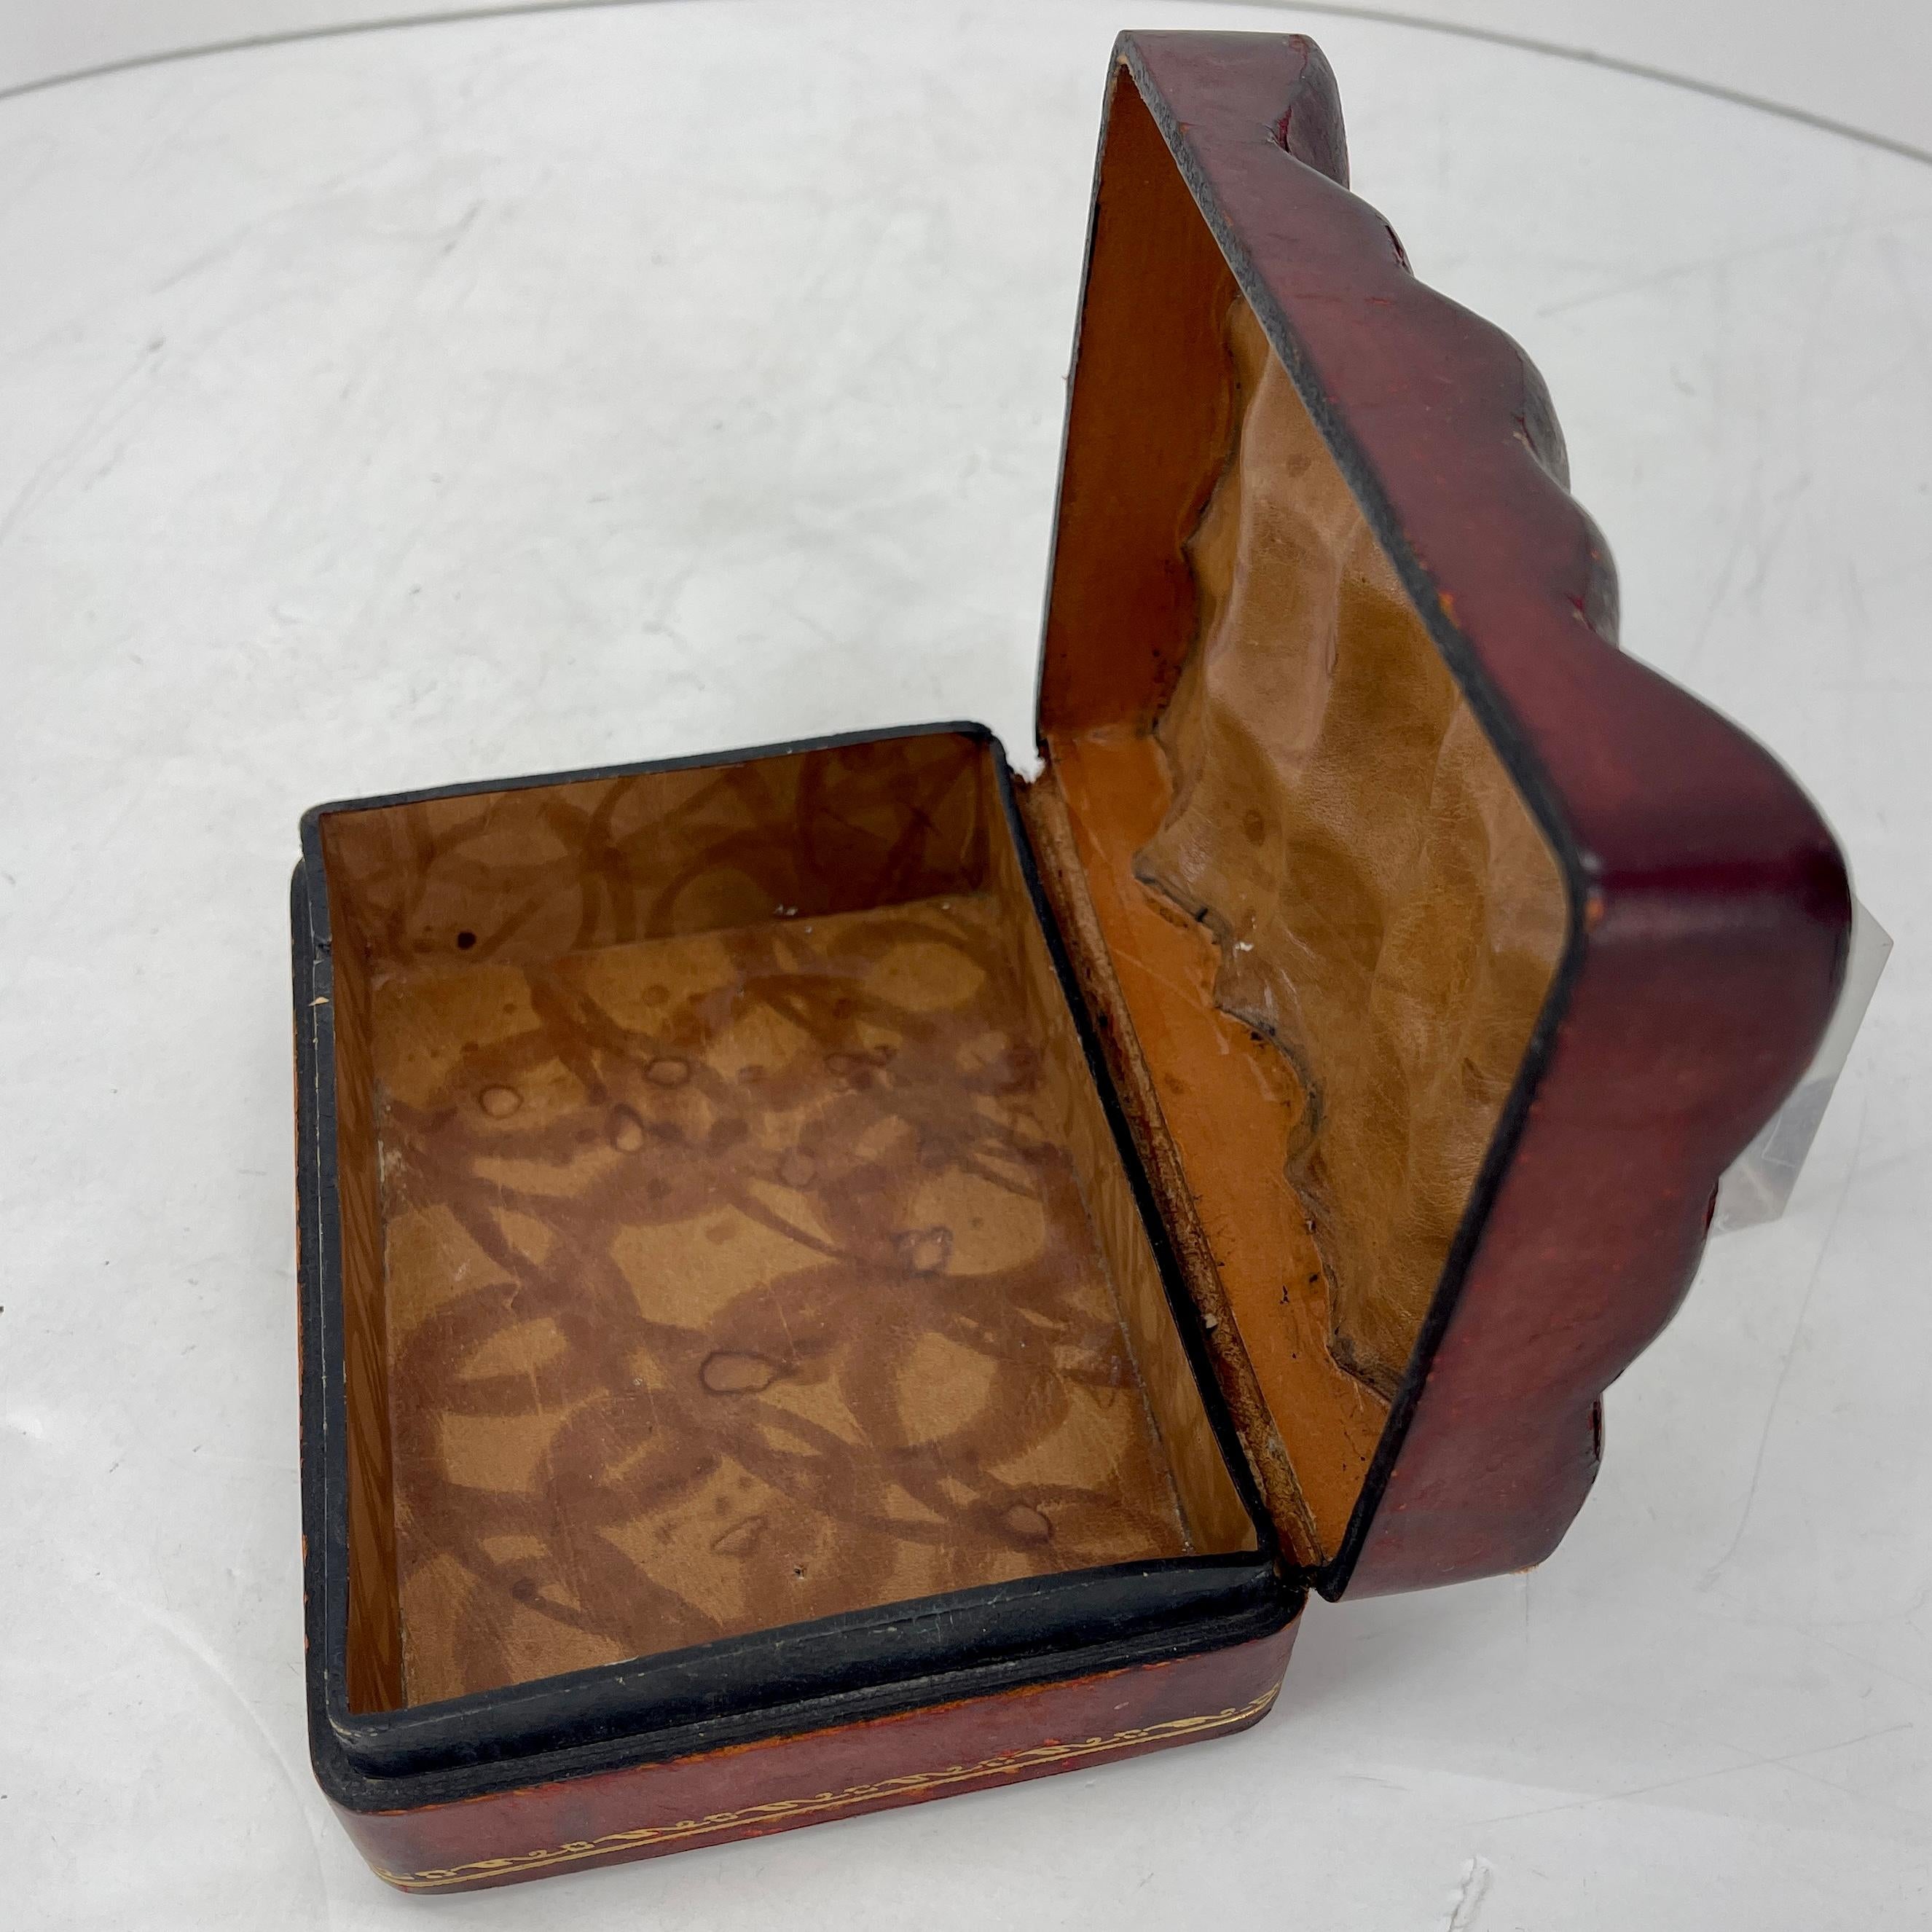 Vintage Italian Jewelry Box in Burgundy Leather, Circa 1950's For Sale 6